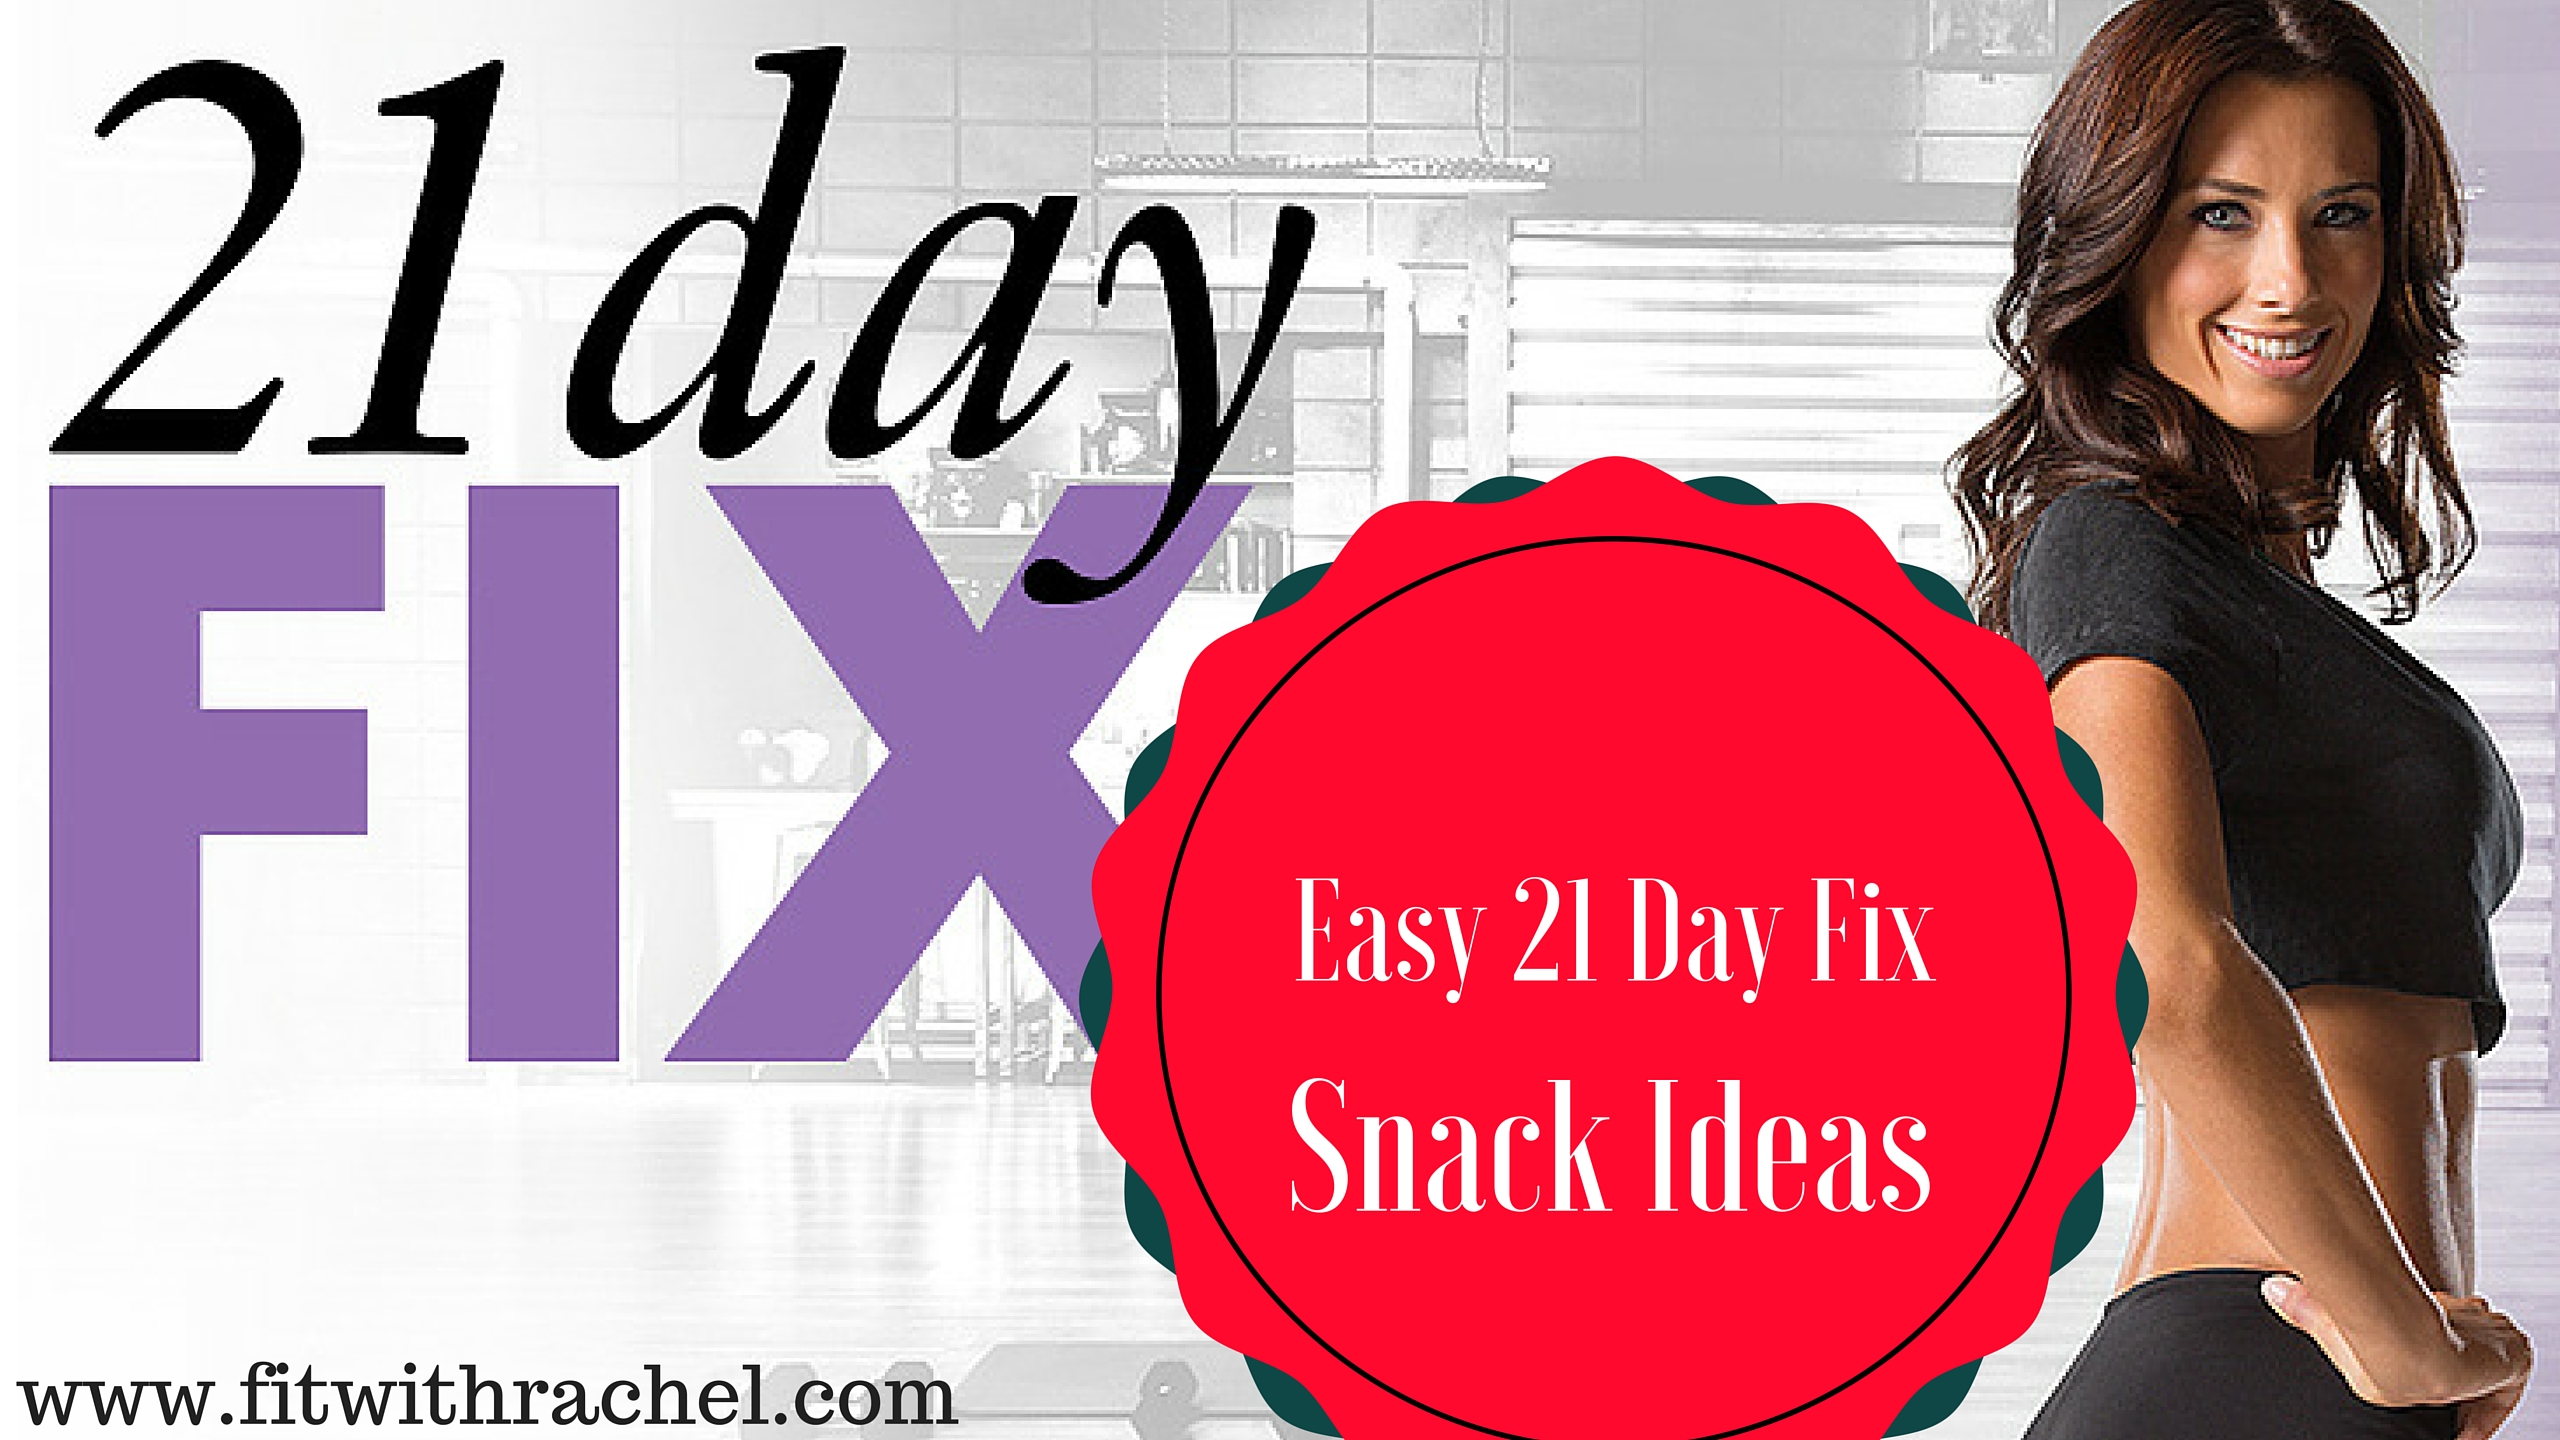 Easy 21 Day Fix Snack Ideas